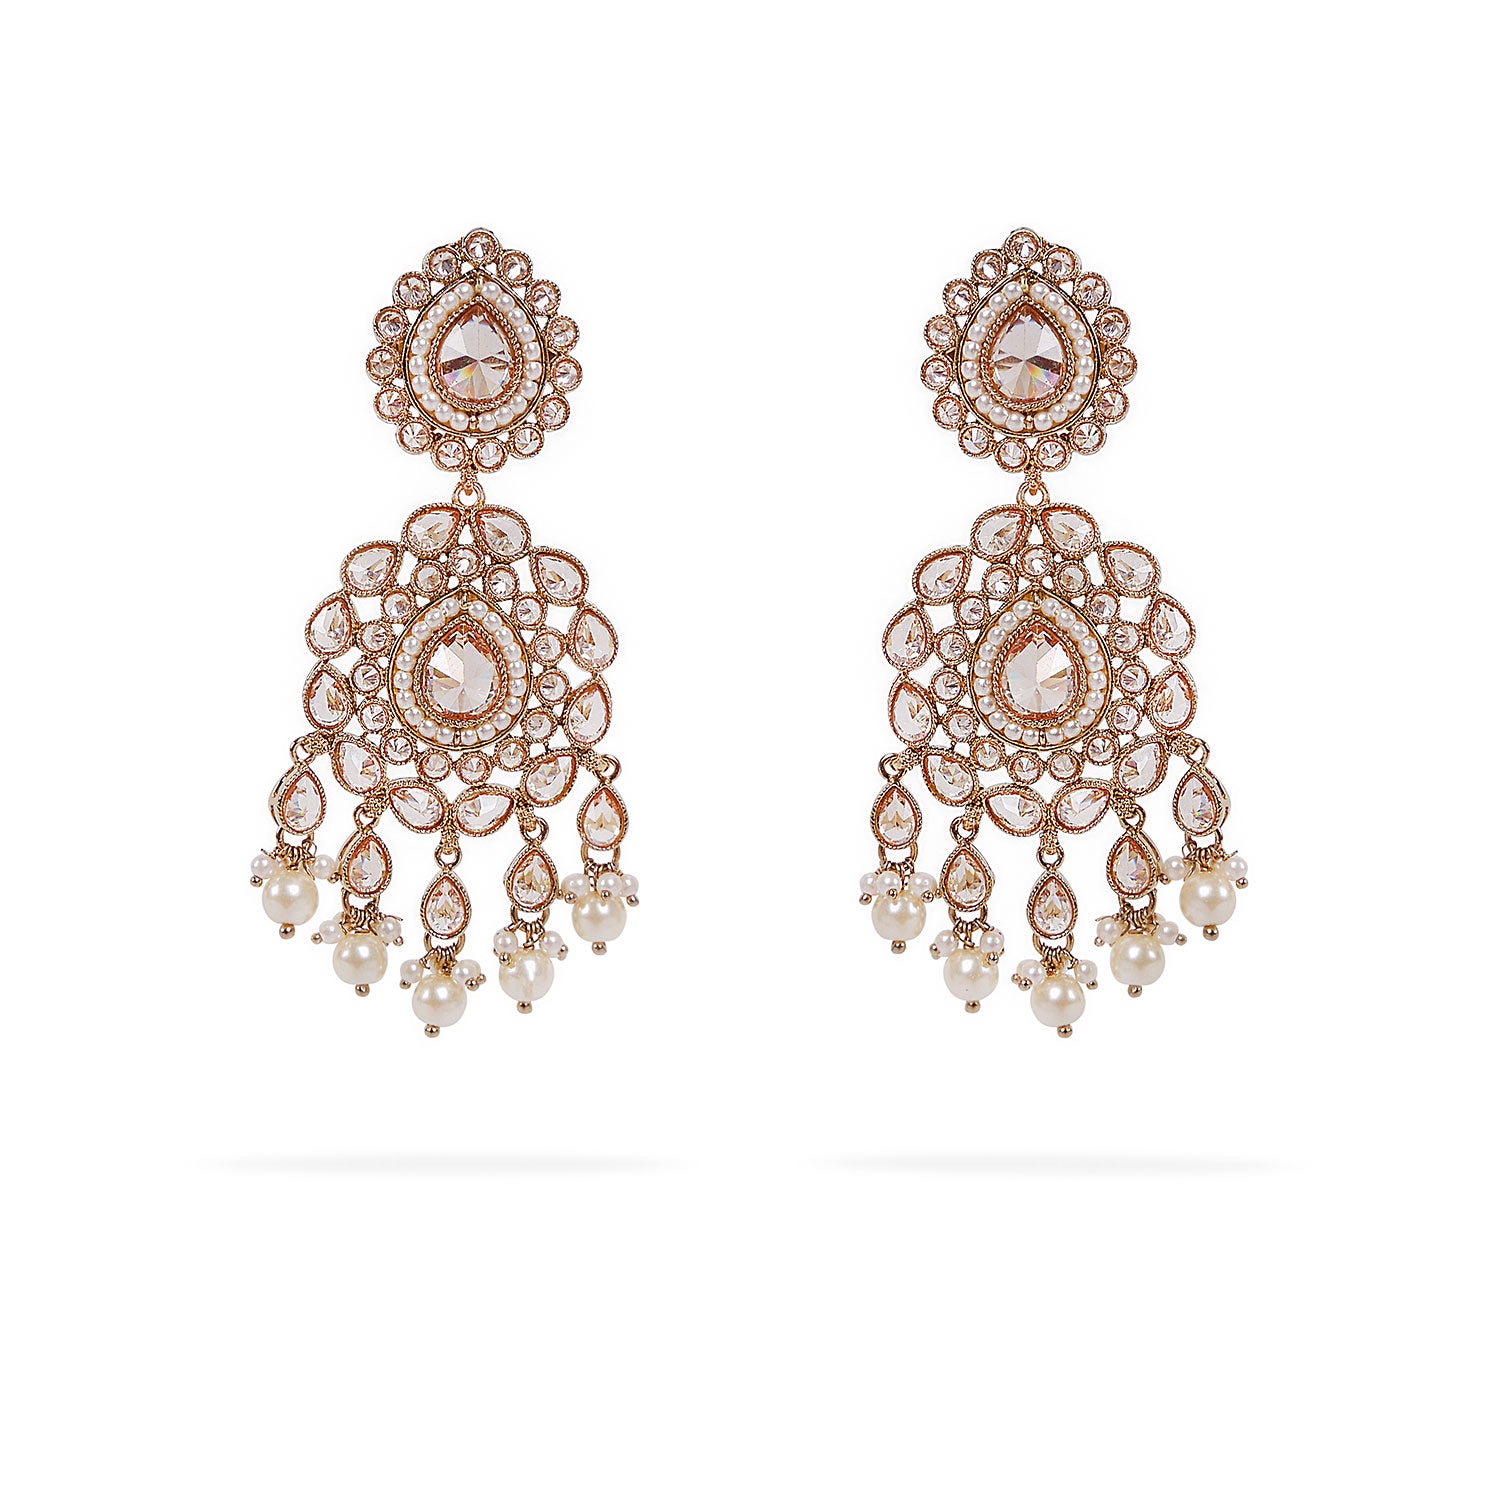 Tanushree Long Earrings in Pearl and Antique Gold